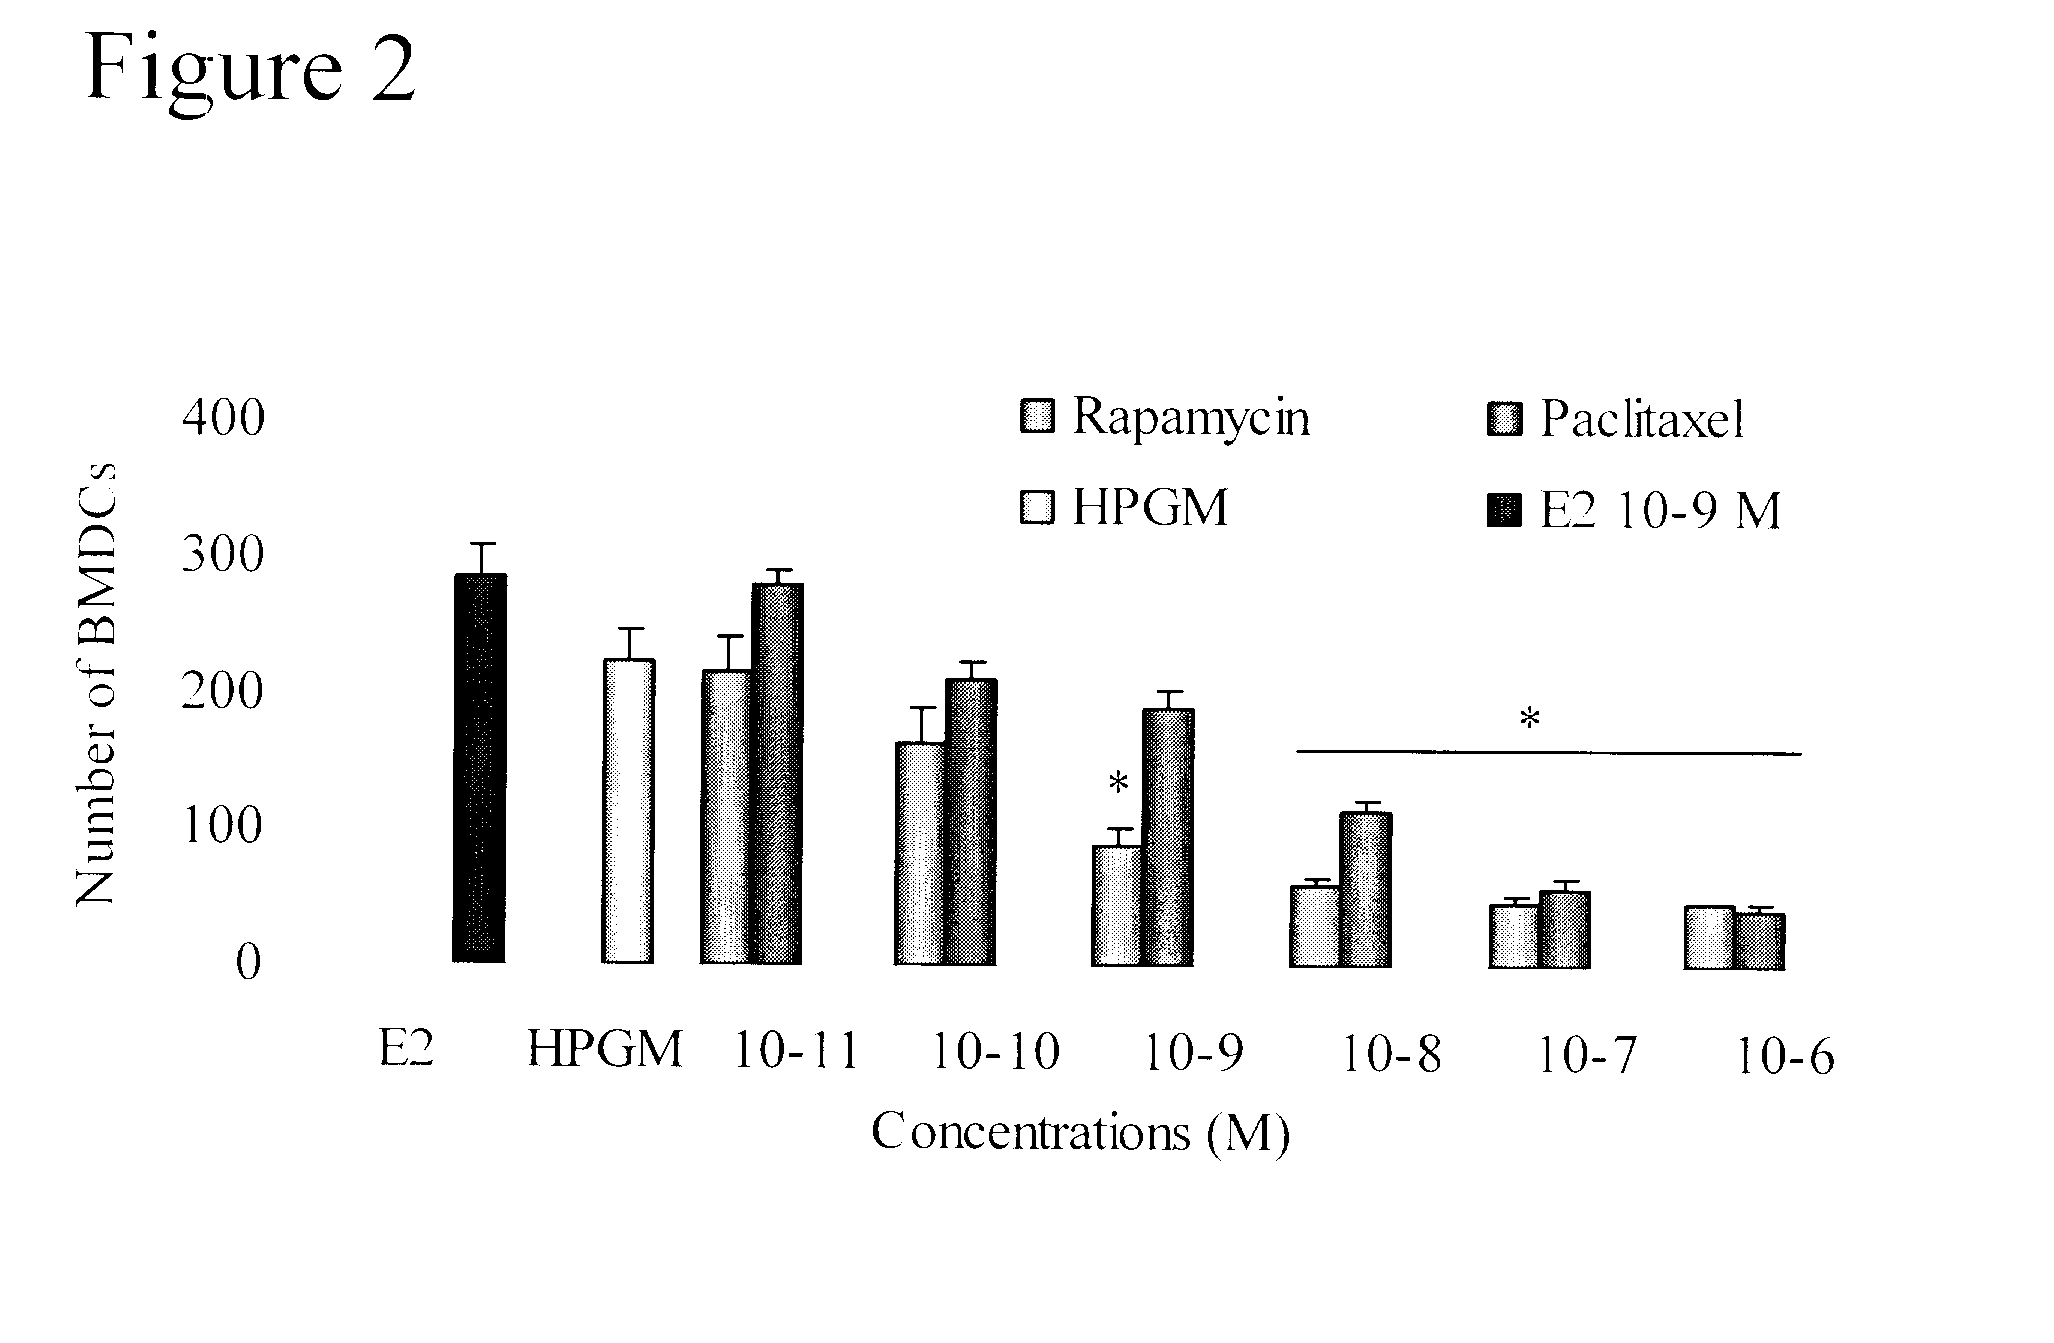 Method of reducing the effects of cytostatic drugs on bone marrow derived cells, and methods of screening